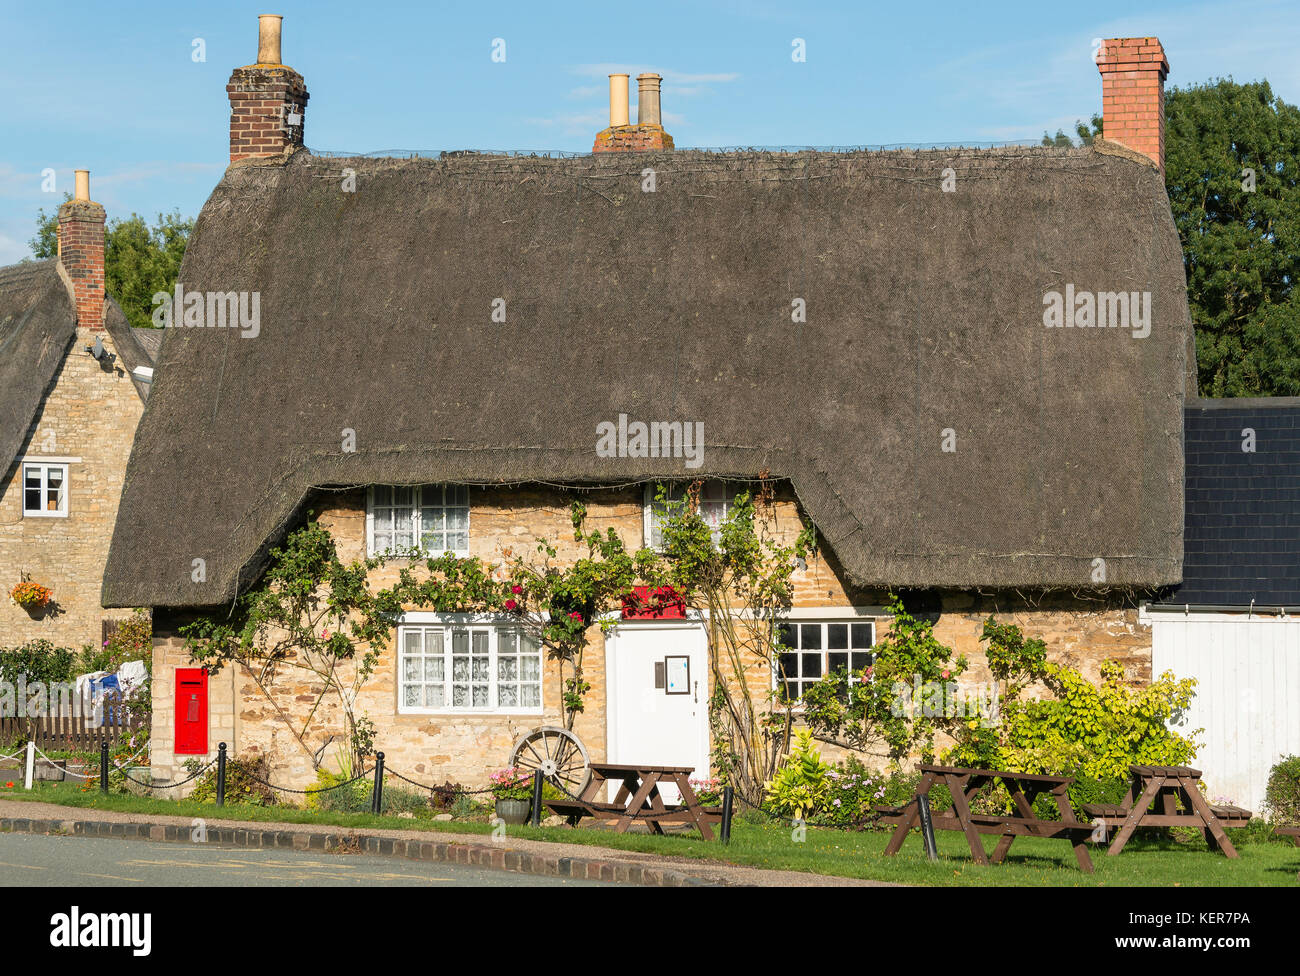 Thatched Cottage Old Post Office In Village Of Weekley Stock